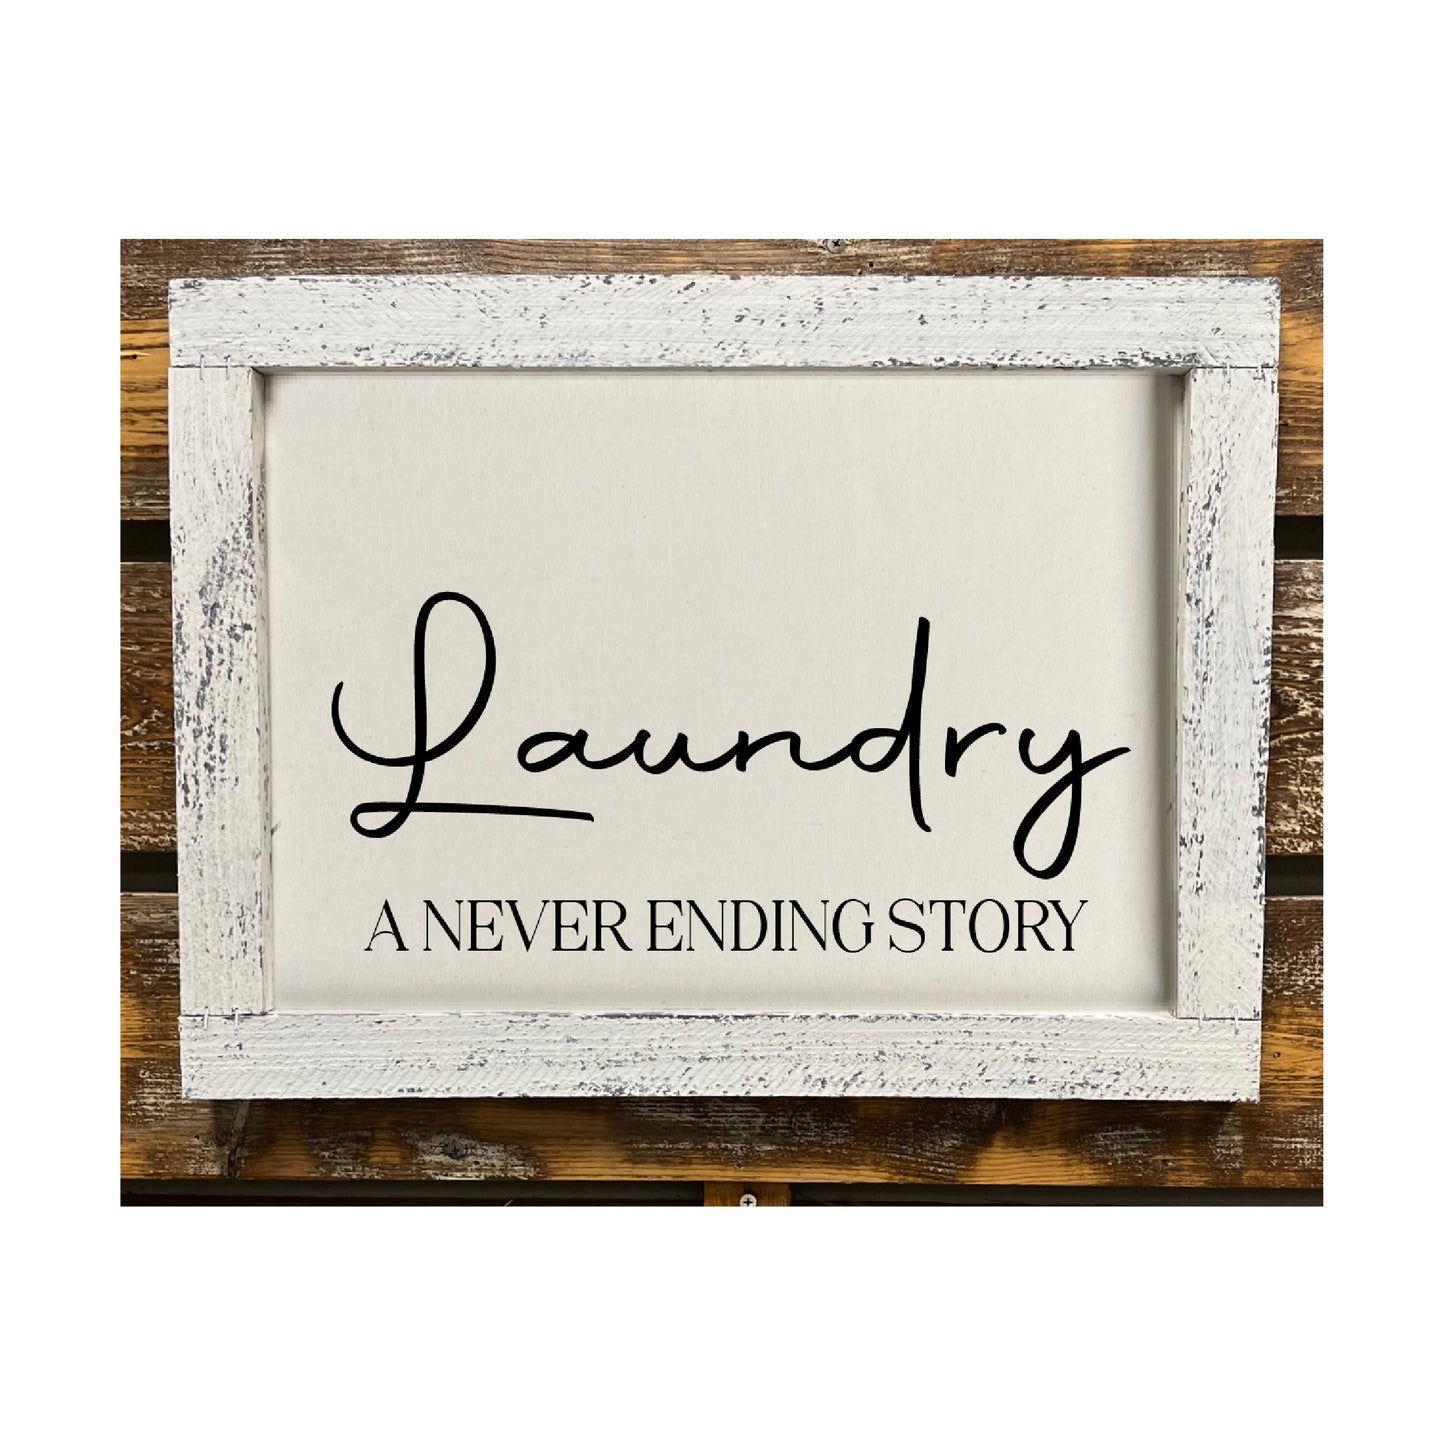 Laundry A Never Ending Story